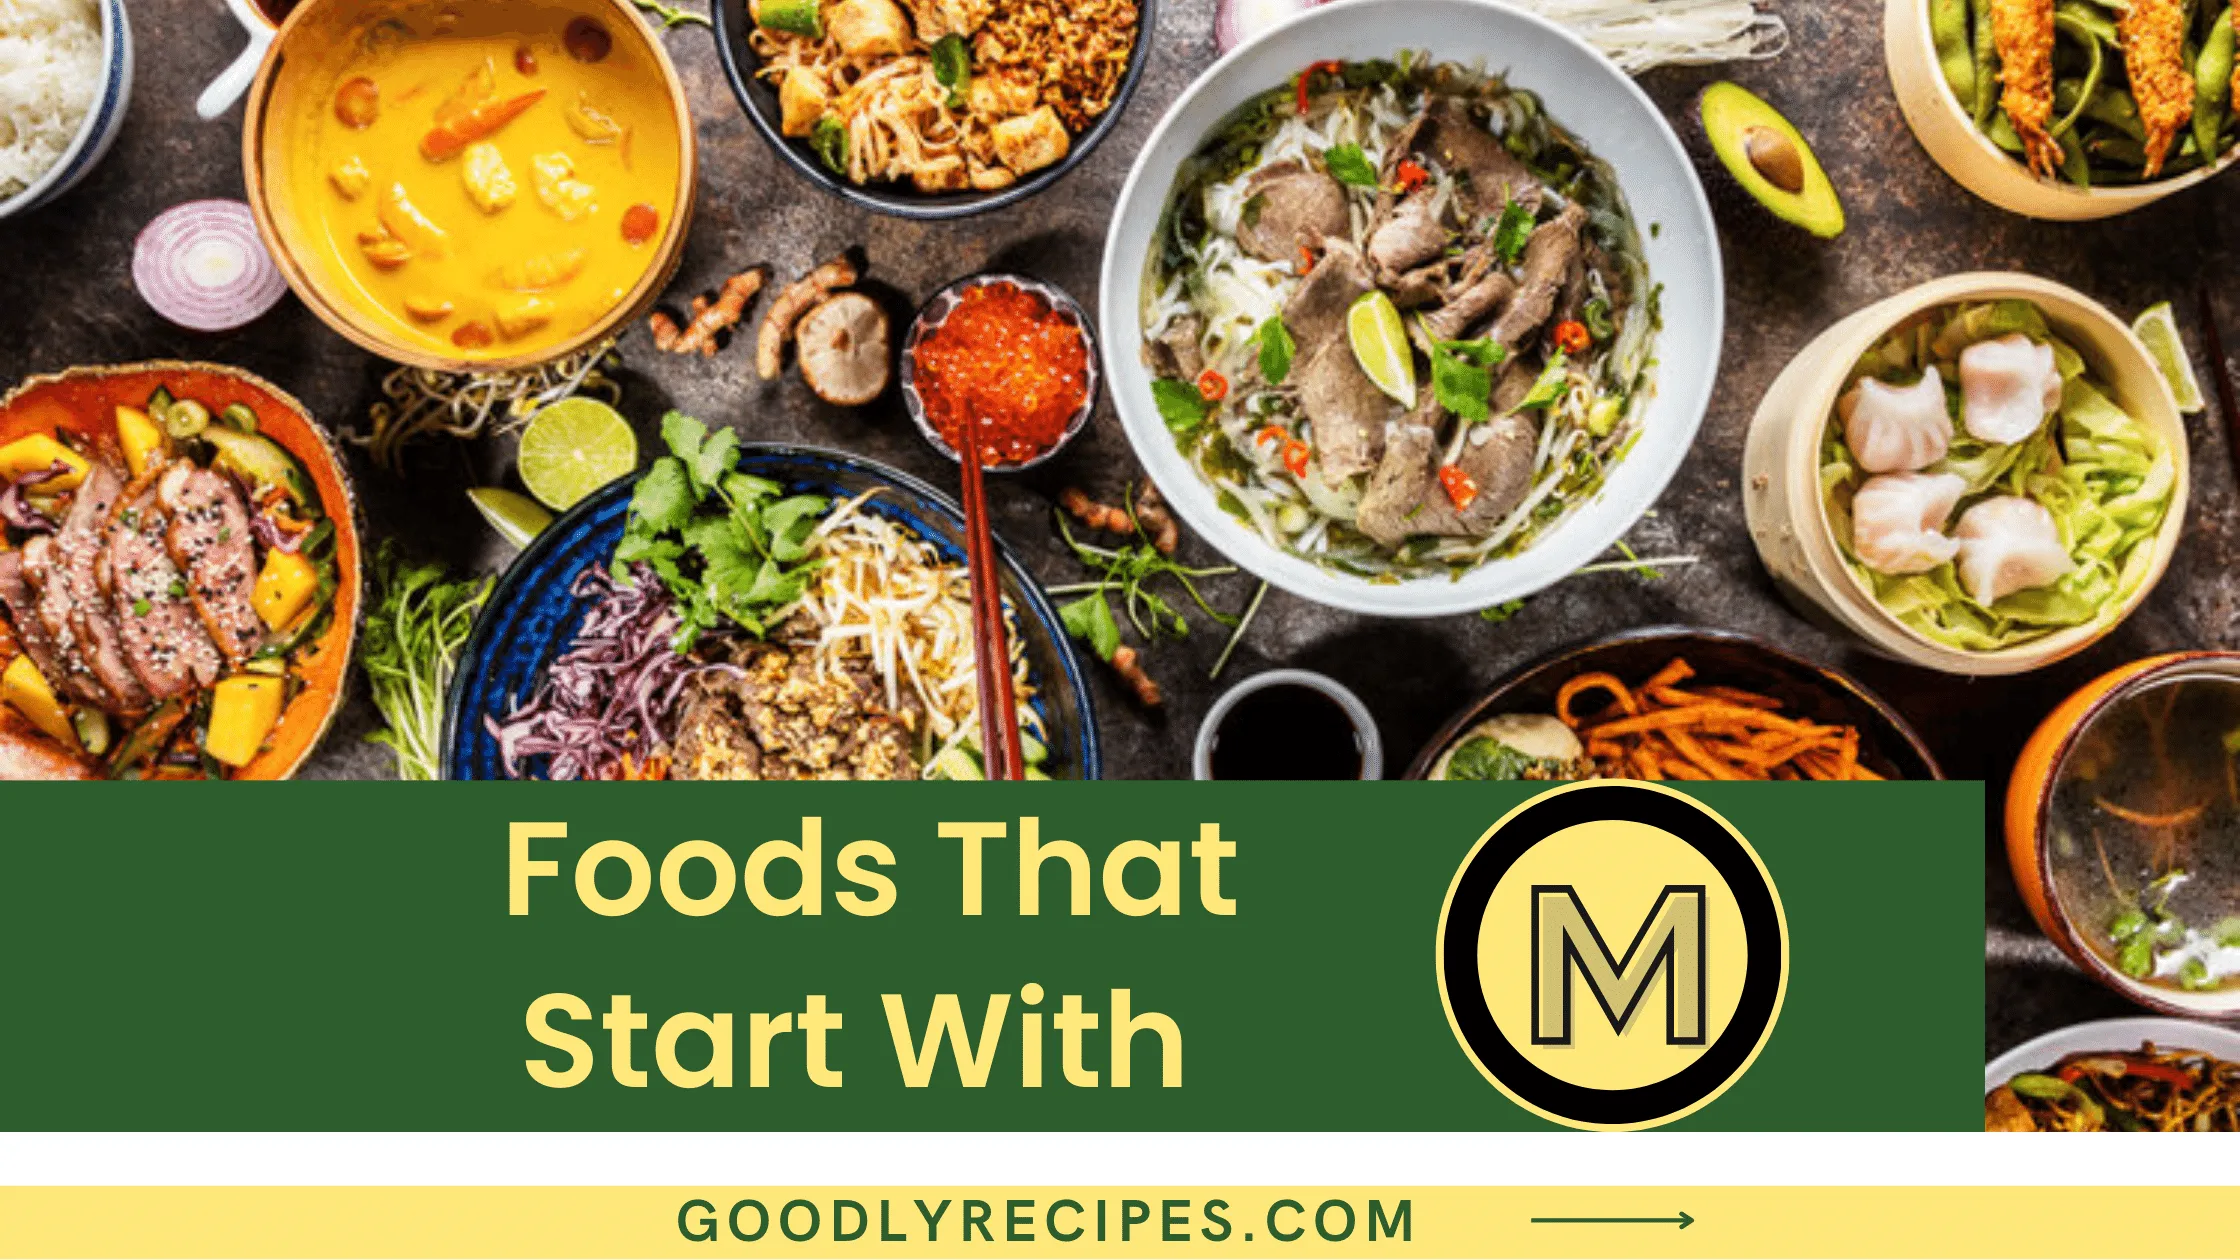 Foods That Start With M - Special Dishes